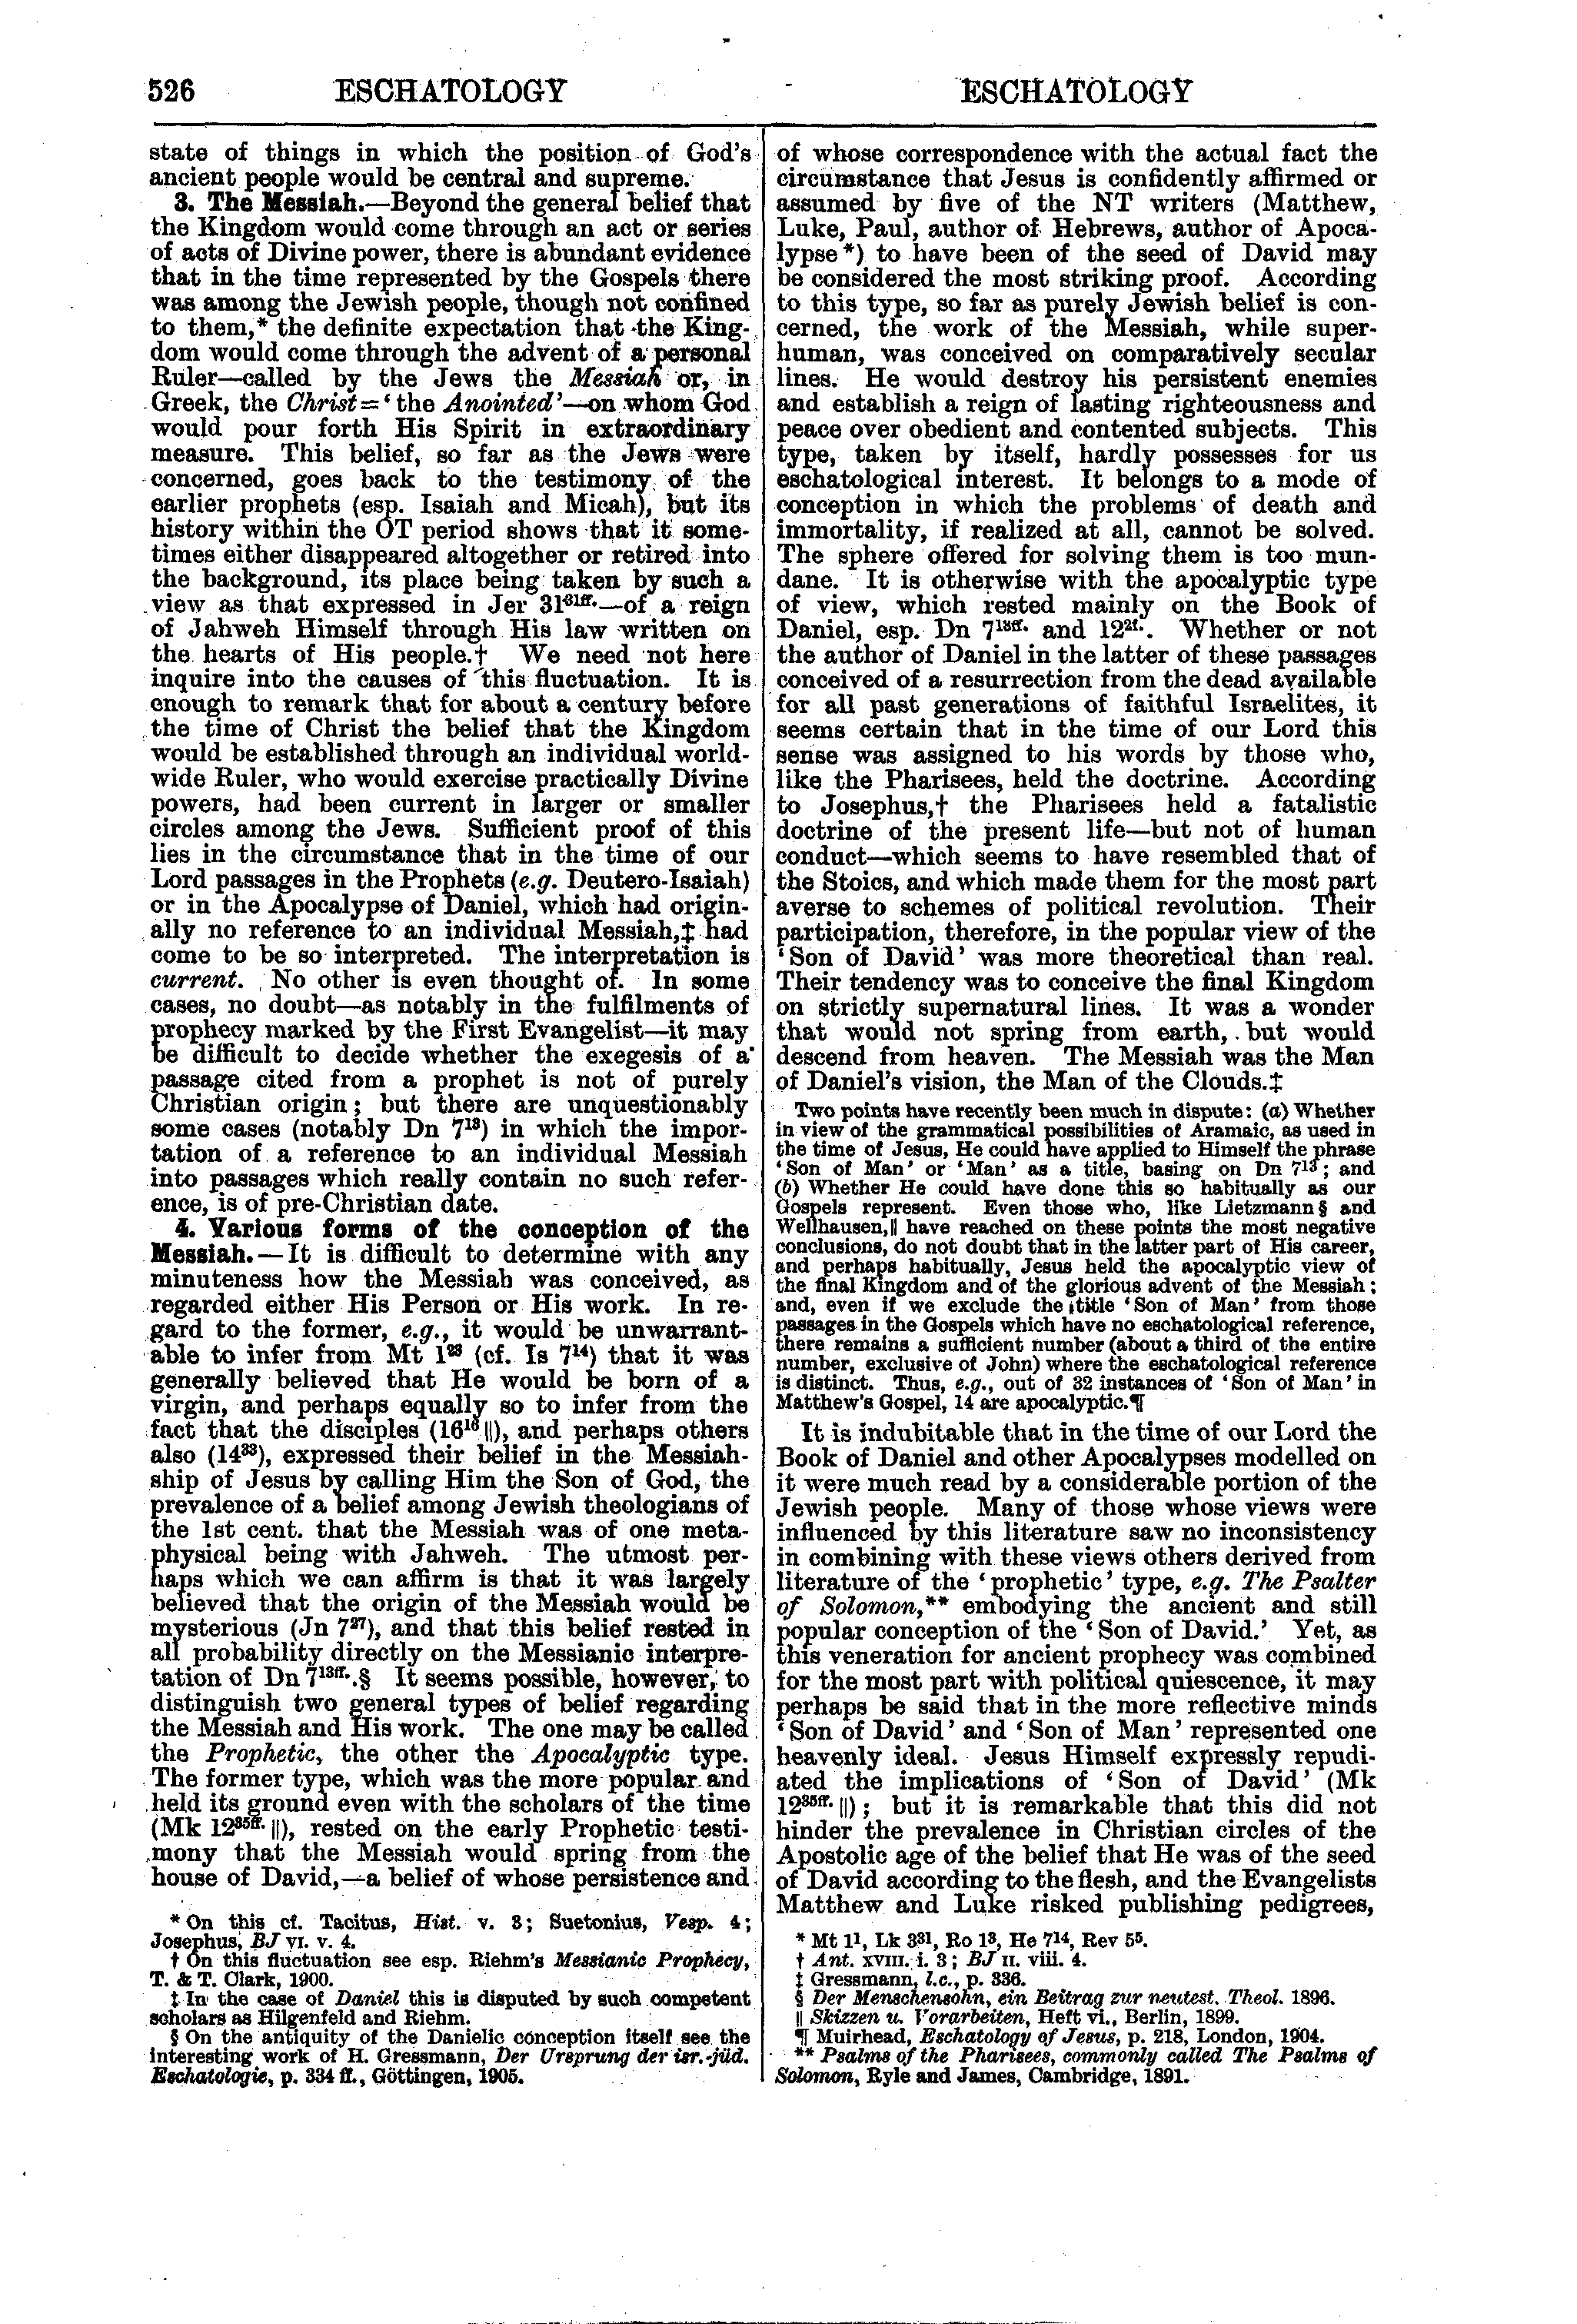 Image of page 526